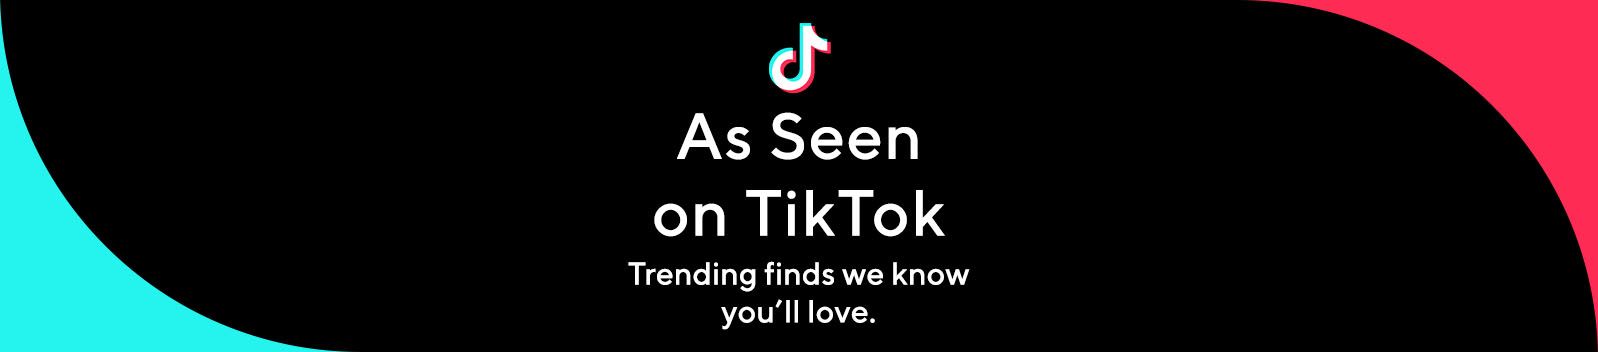 As Seen on TikTok: Trending finds we know you'll love.